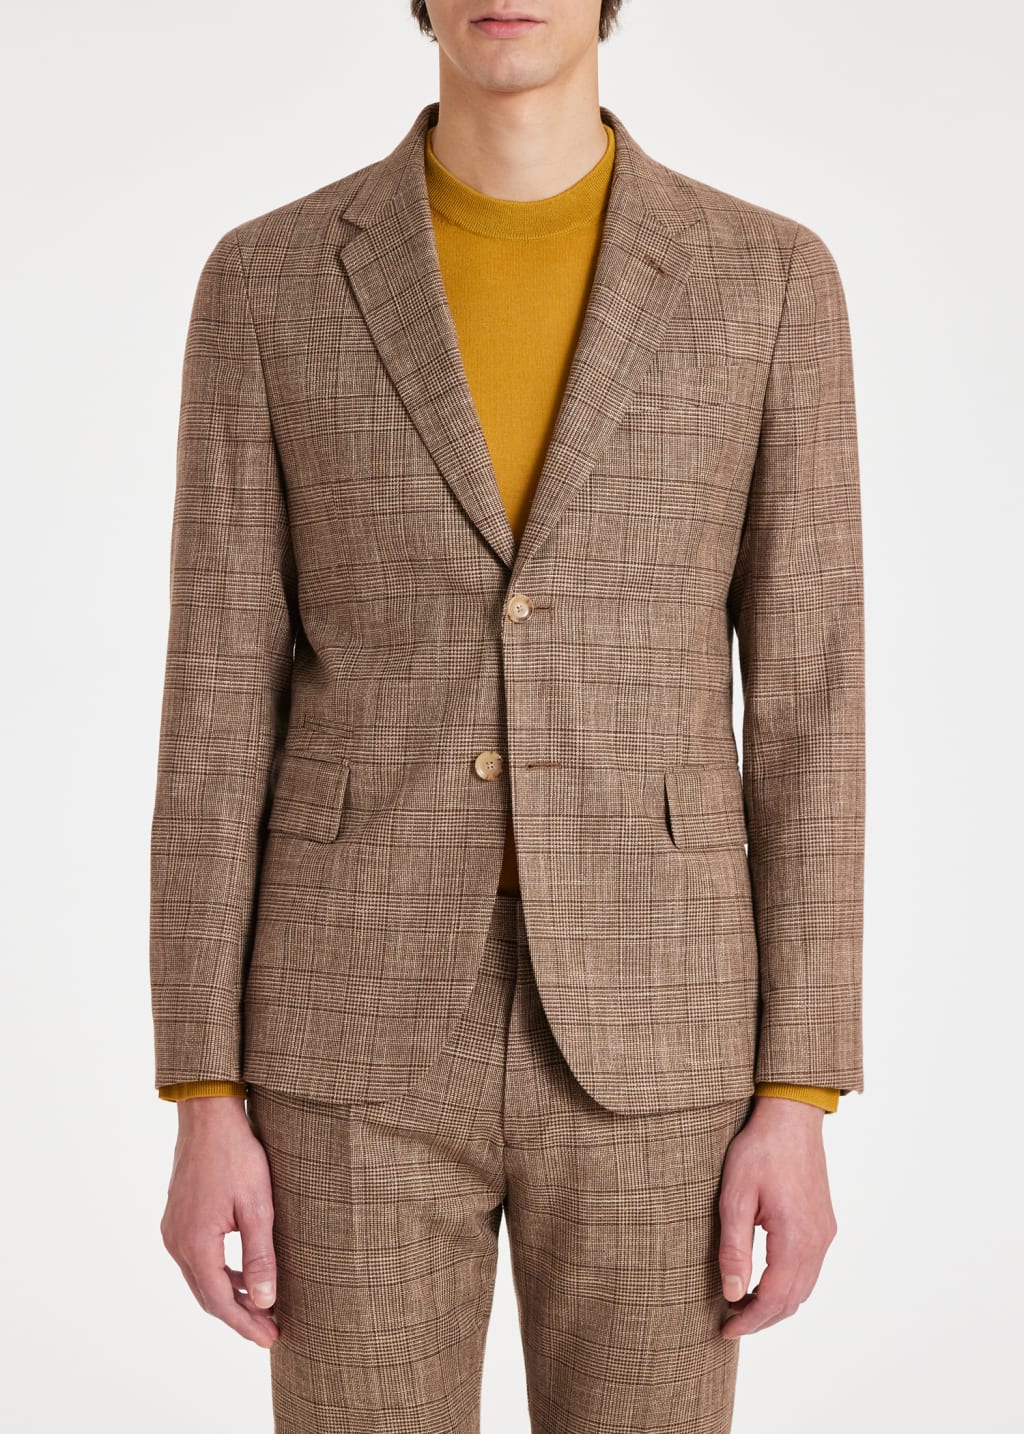 Model View - Brown Houndstooth Check Wool-Linen Blazer Paul Smith